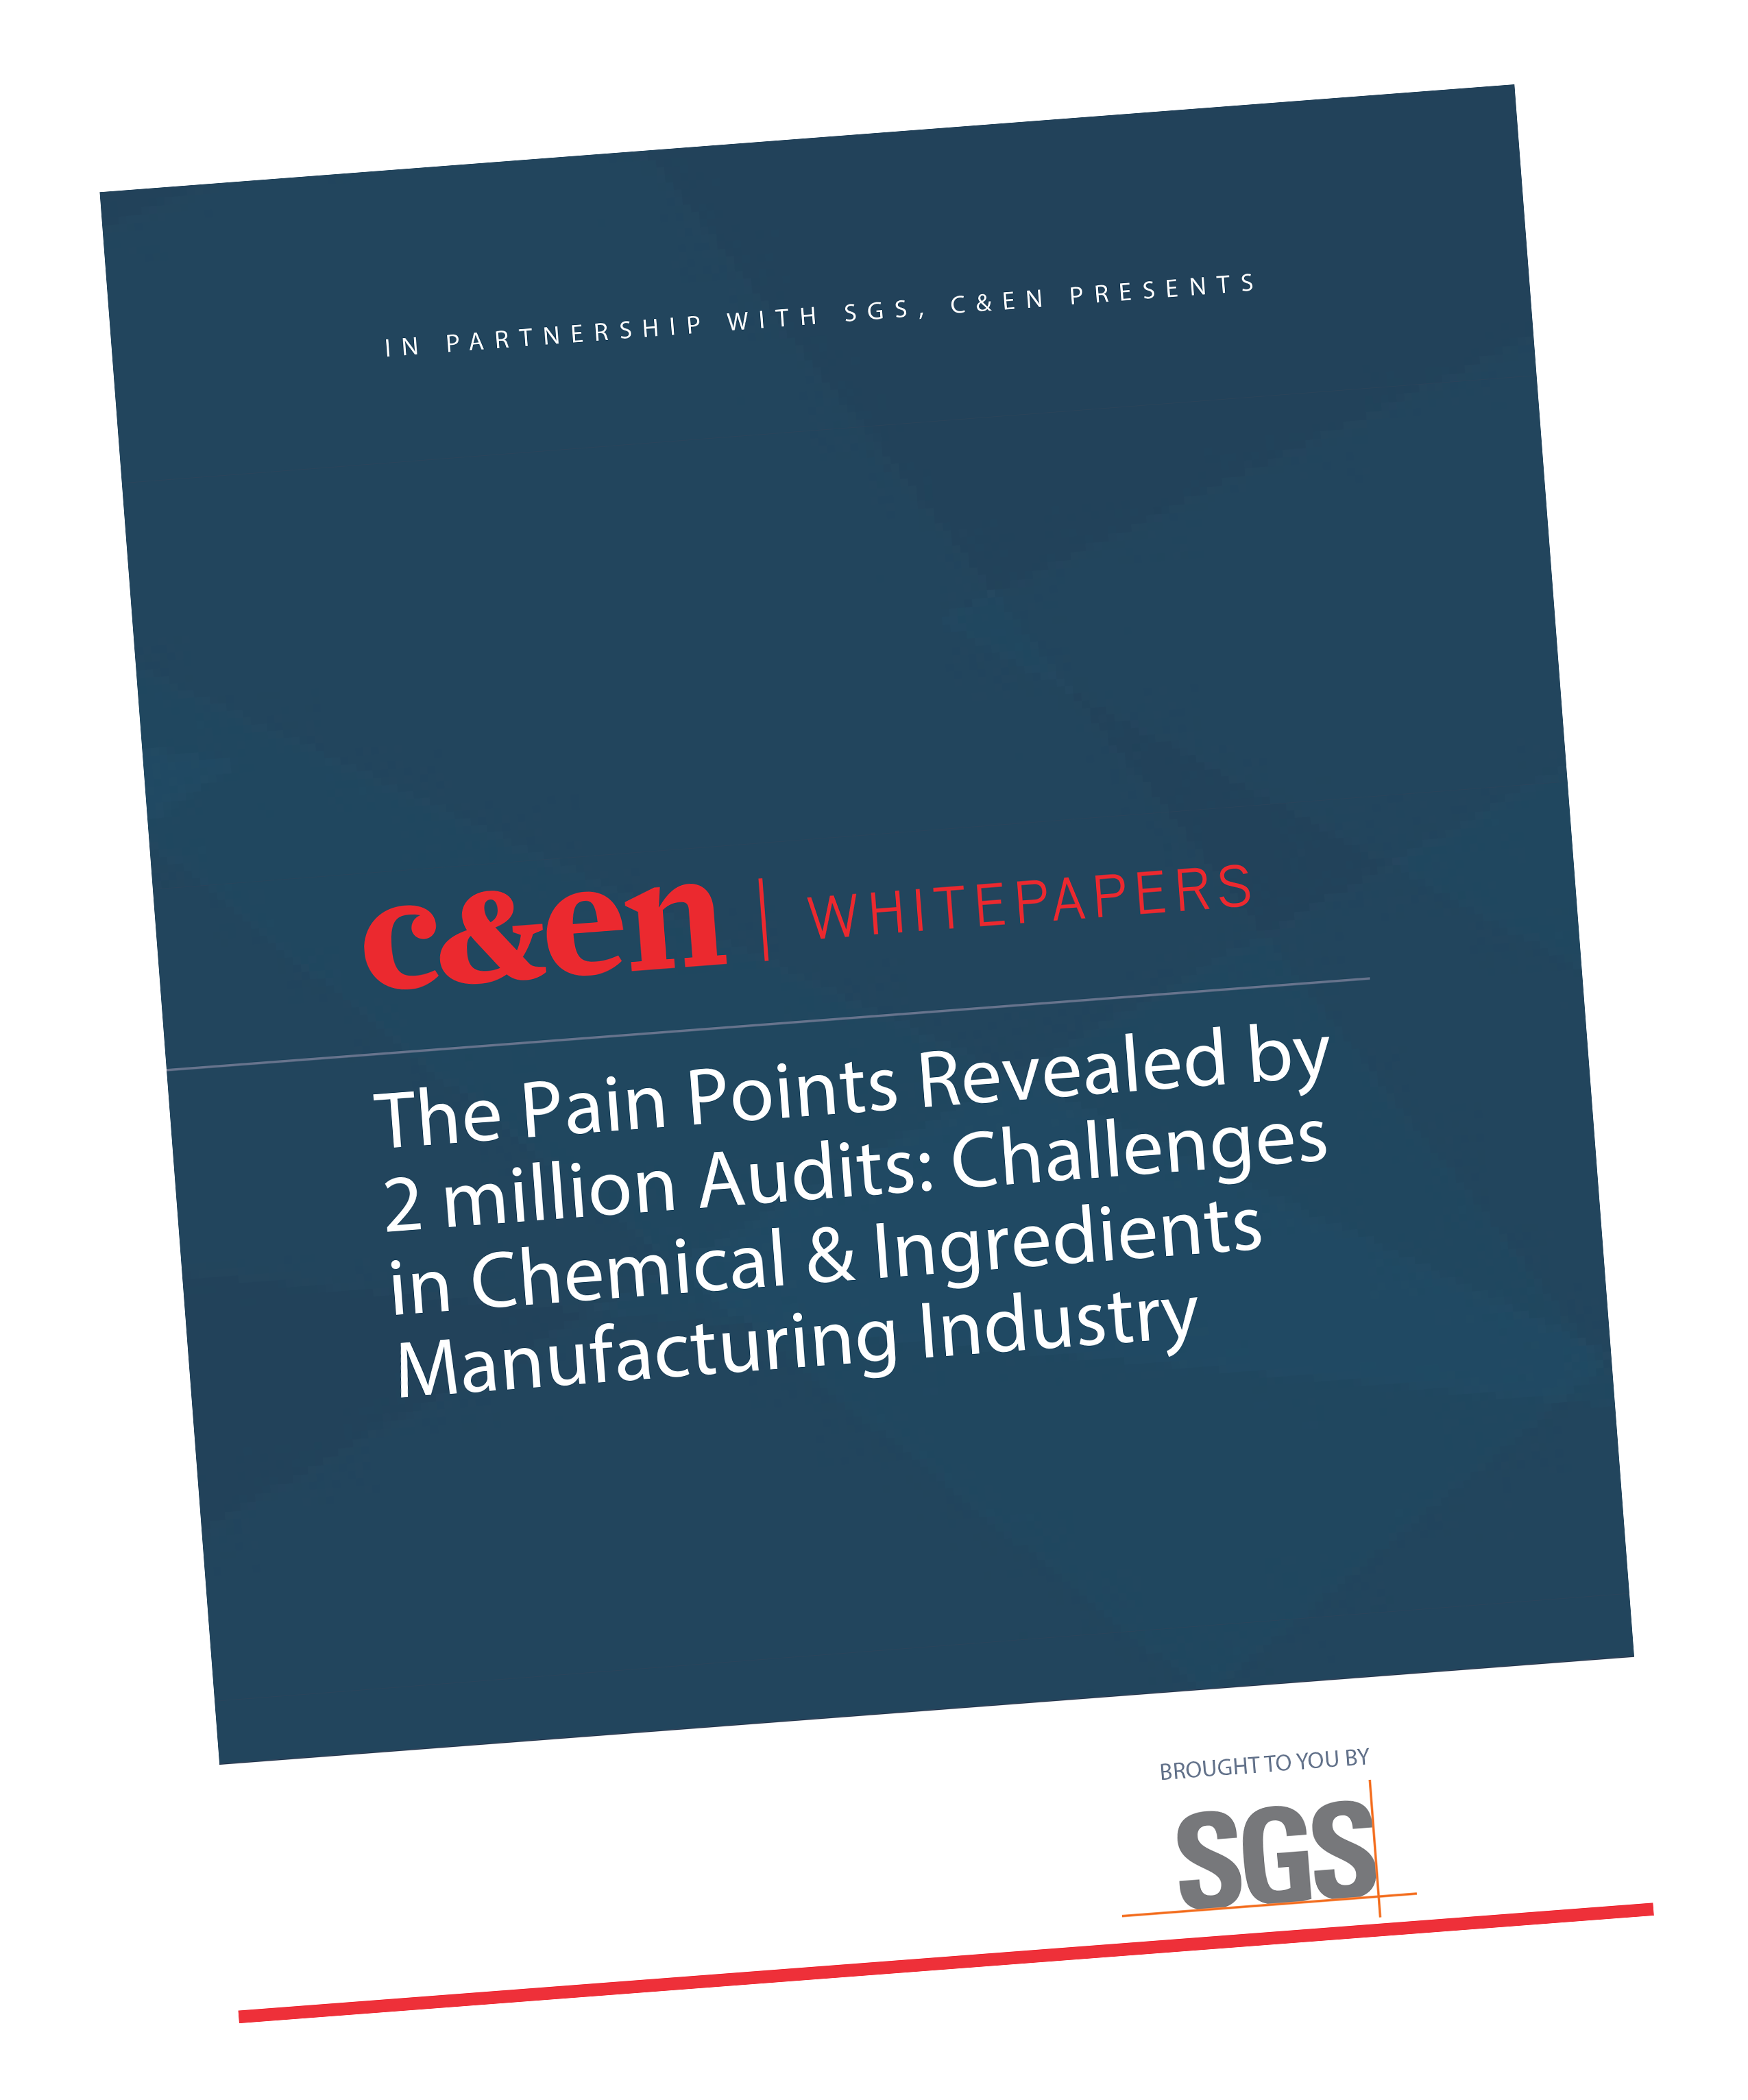 Pain points in Chemical & Ingredients Manufacturing Industry